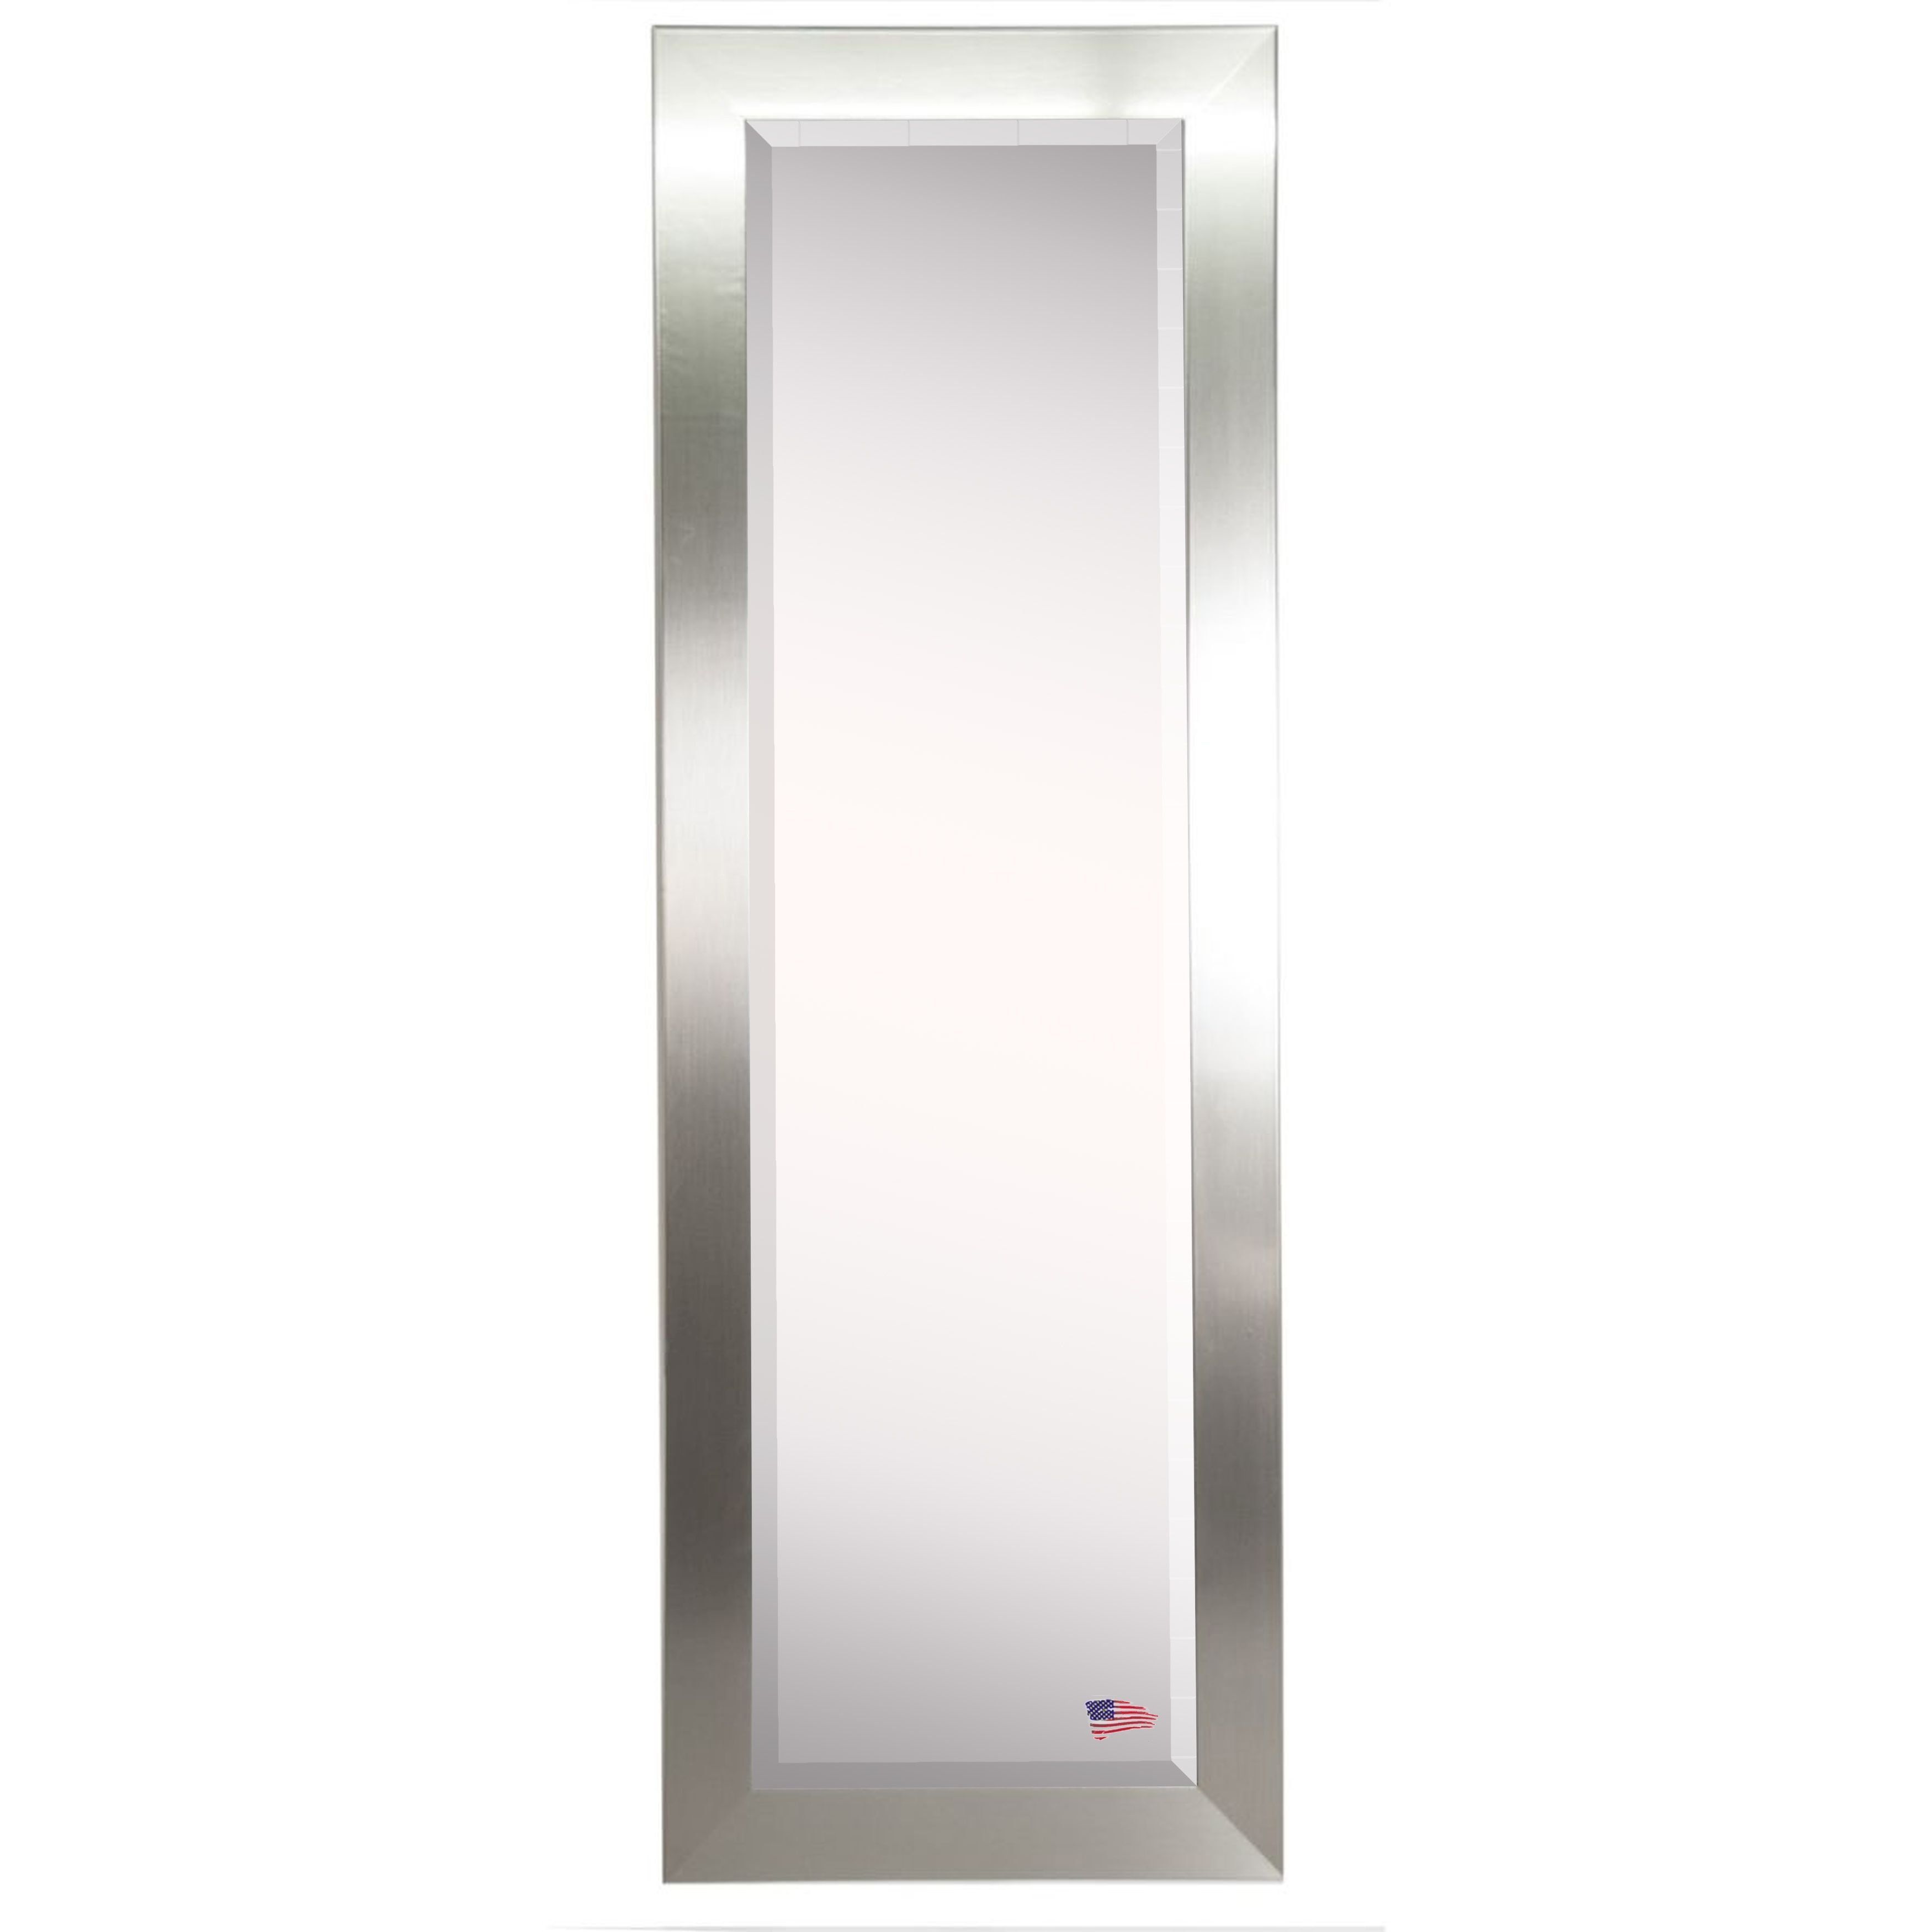 Dalessio Wide Modern Contemporary Full Length Beveled Body Dresser Mirror In Dalessio Wide Tall Full Length Mirrors (View 8 of 30)